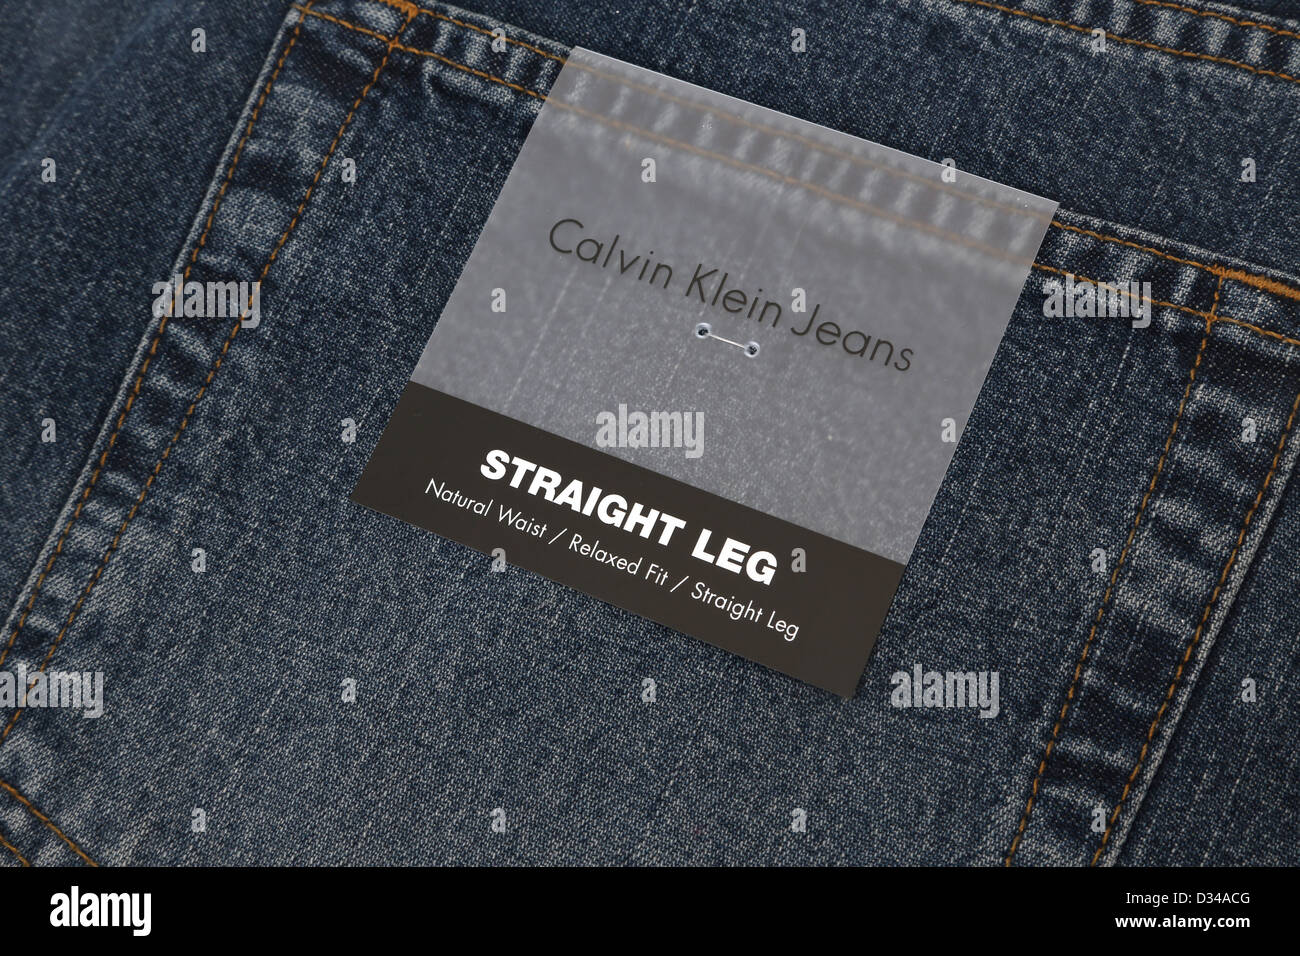 Close Up Of Label On Calvin Klein Straight Leg Jeans Stock Photo - Alamy